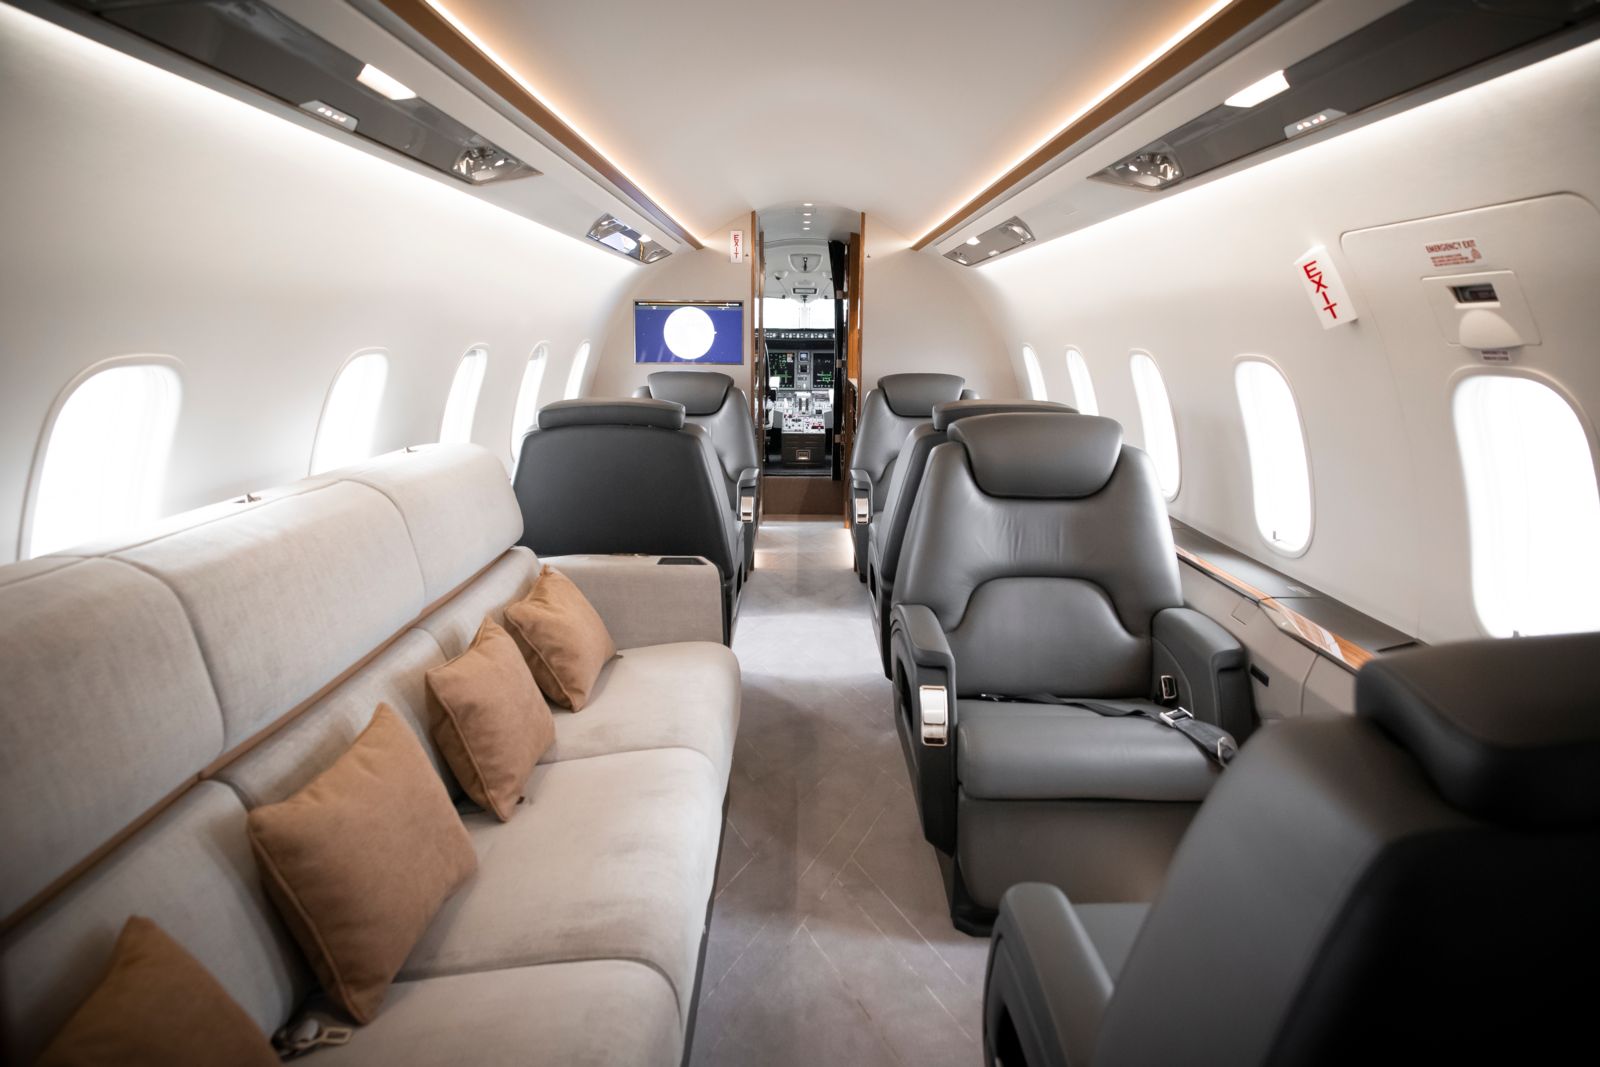 Bombardier CL 350  S/N 20913 for sale | gallery image: /userfiles/images/CL350_20913/cl350%20n514fb%20sn%2020913%20(5d3_9261)%20aft%20to%20fwd.jpg